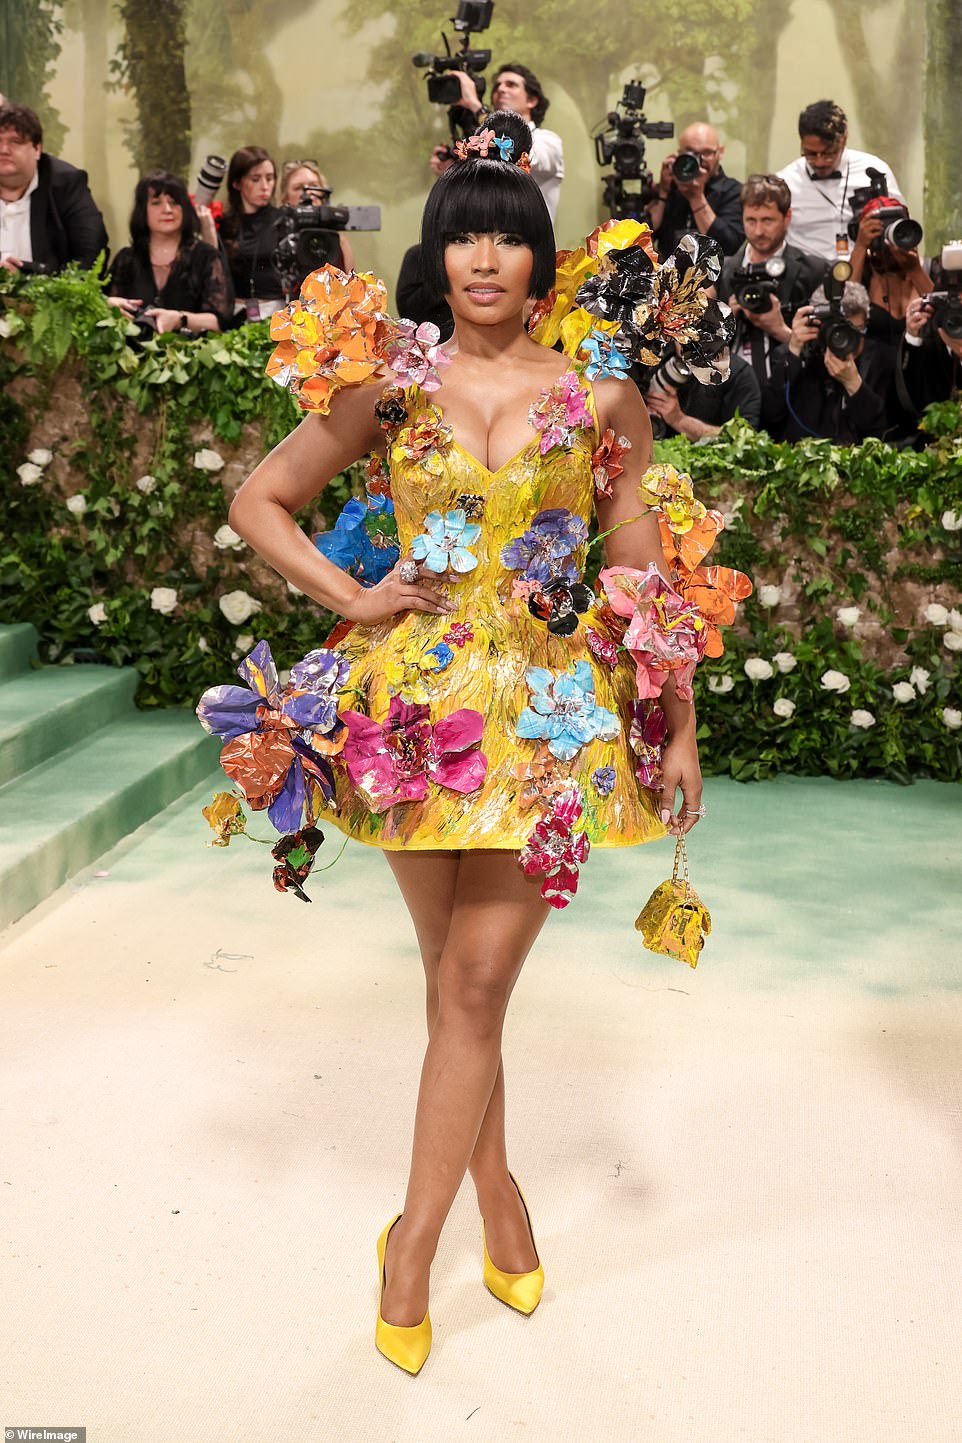 Nicki Minaj wore a yellow mini dress with three-dimensional flowers in different colors throughout